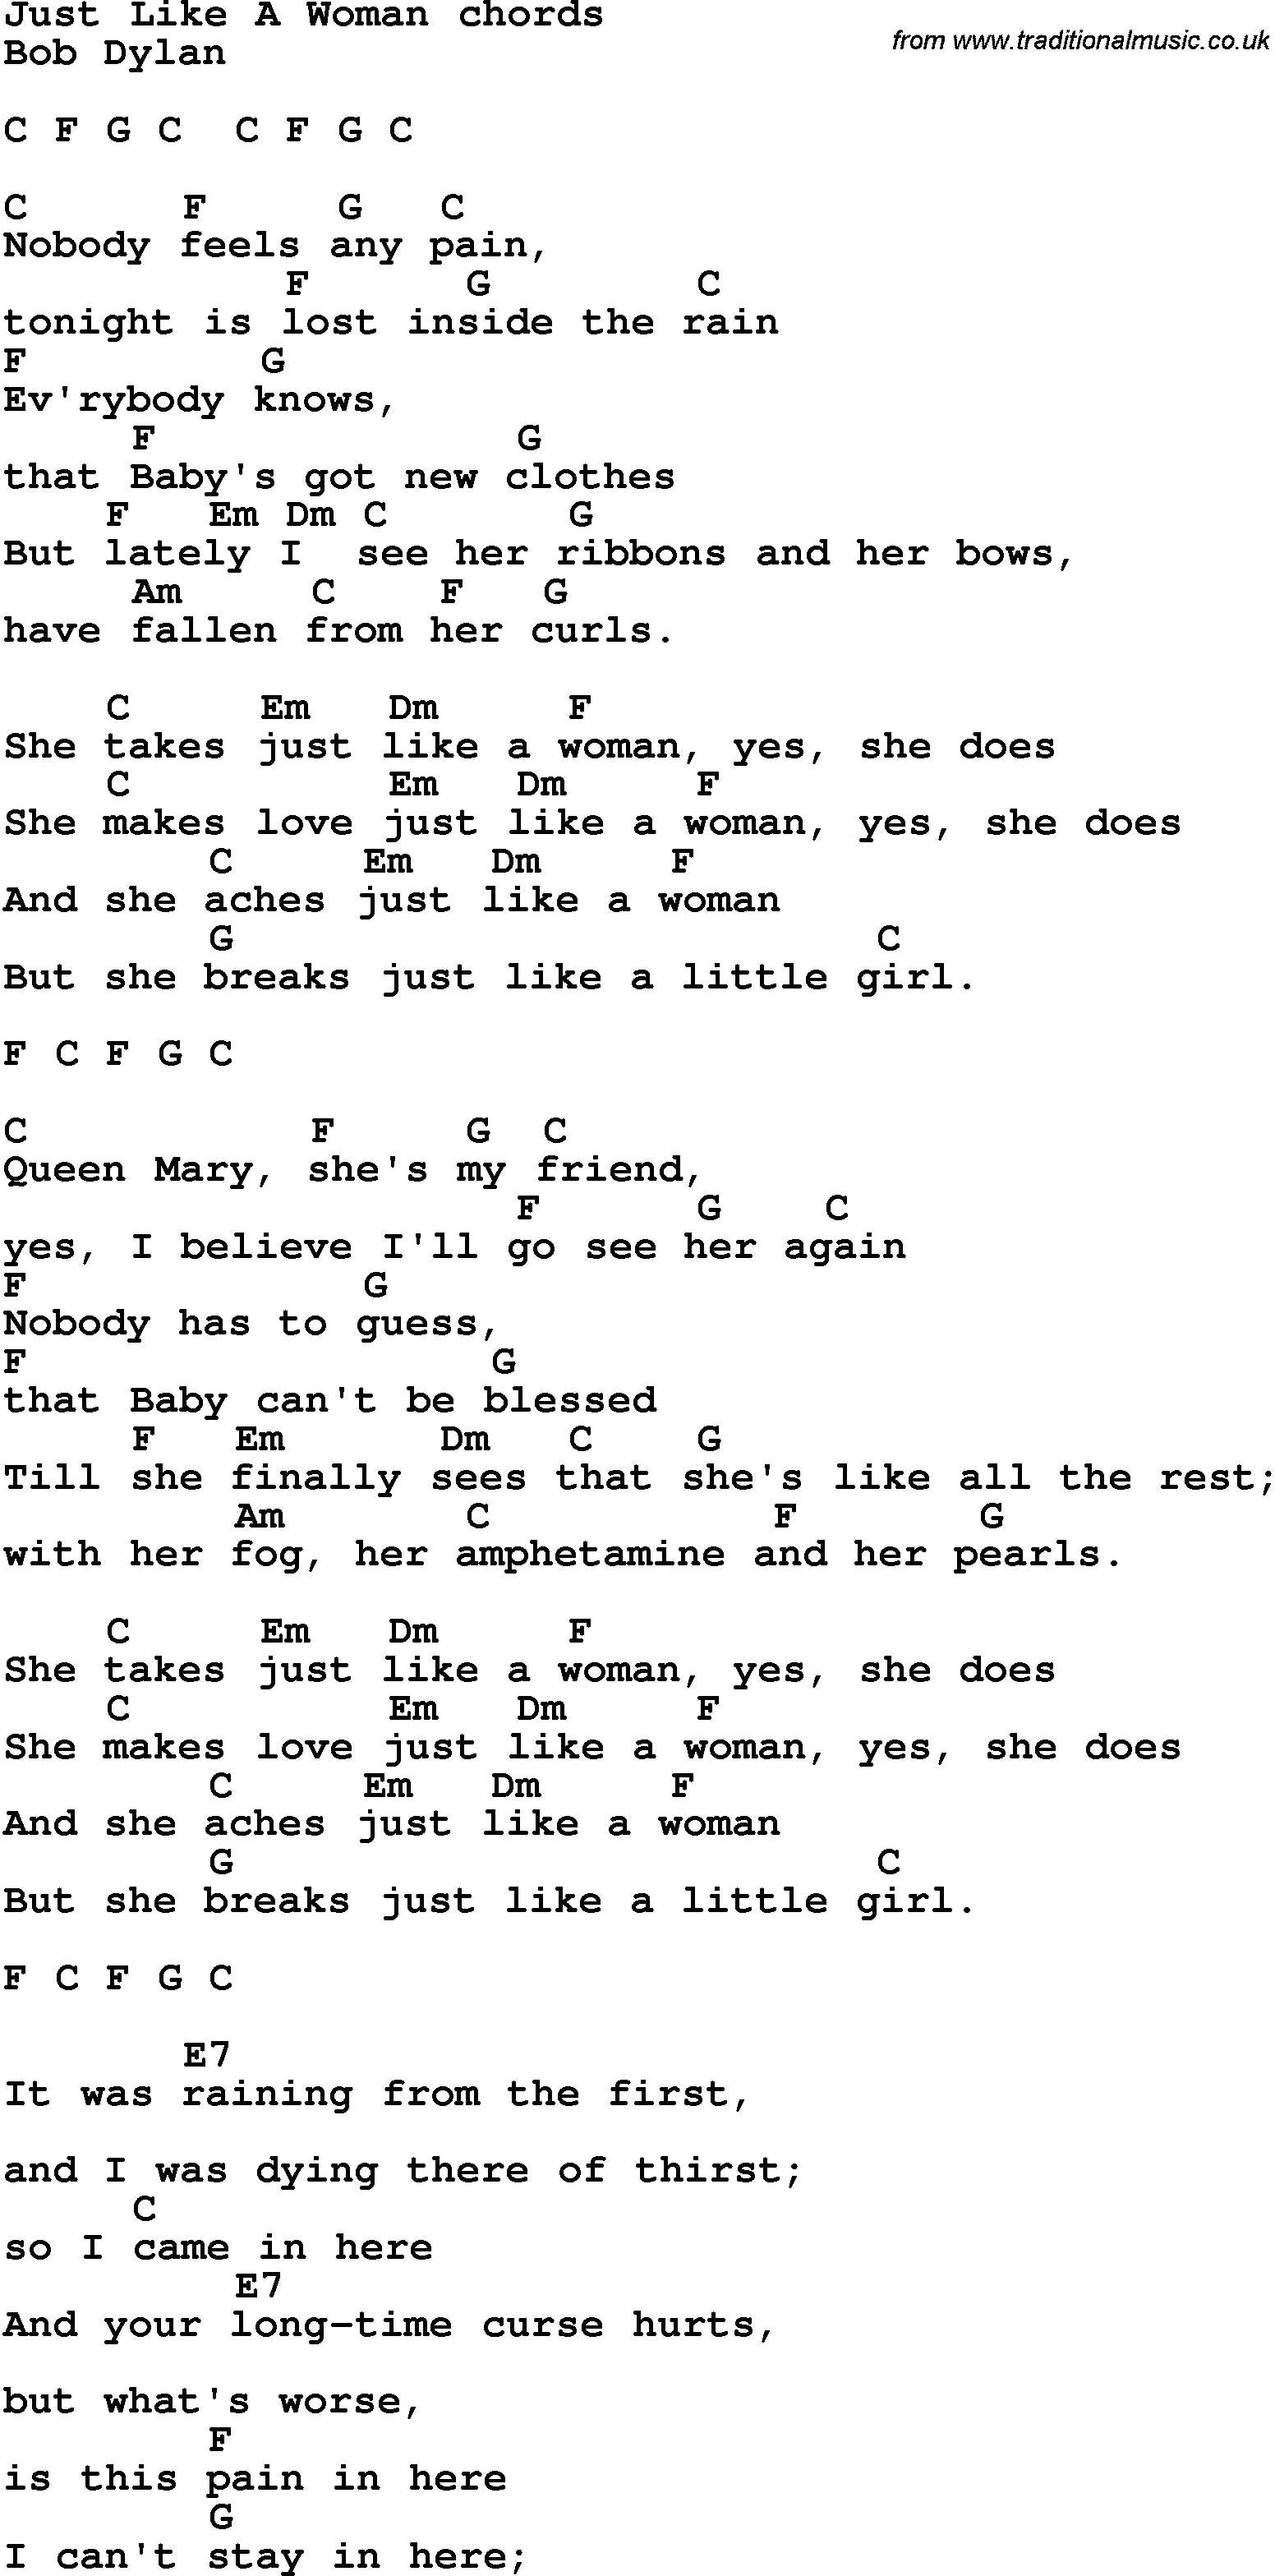 Song Lyrics with guitar chords for Just Like A Woman